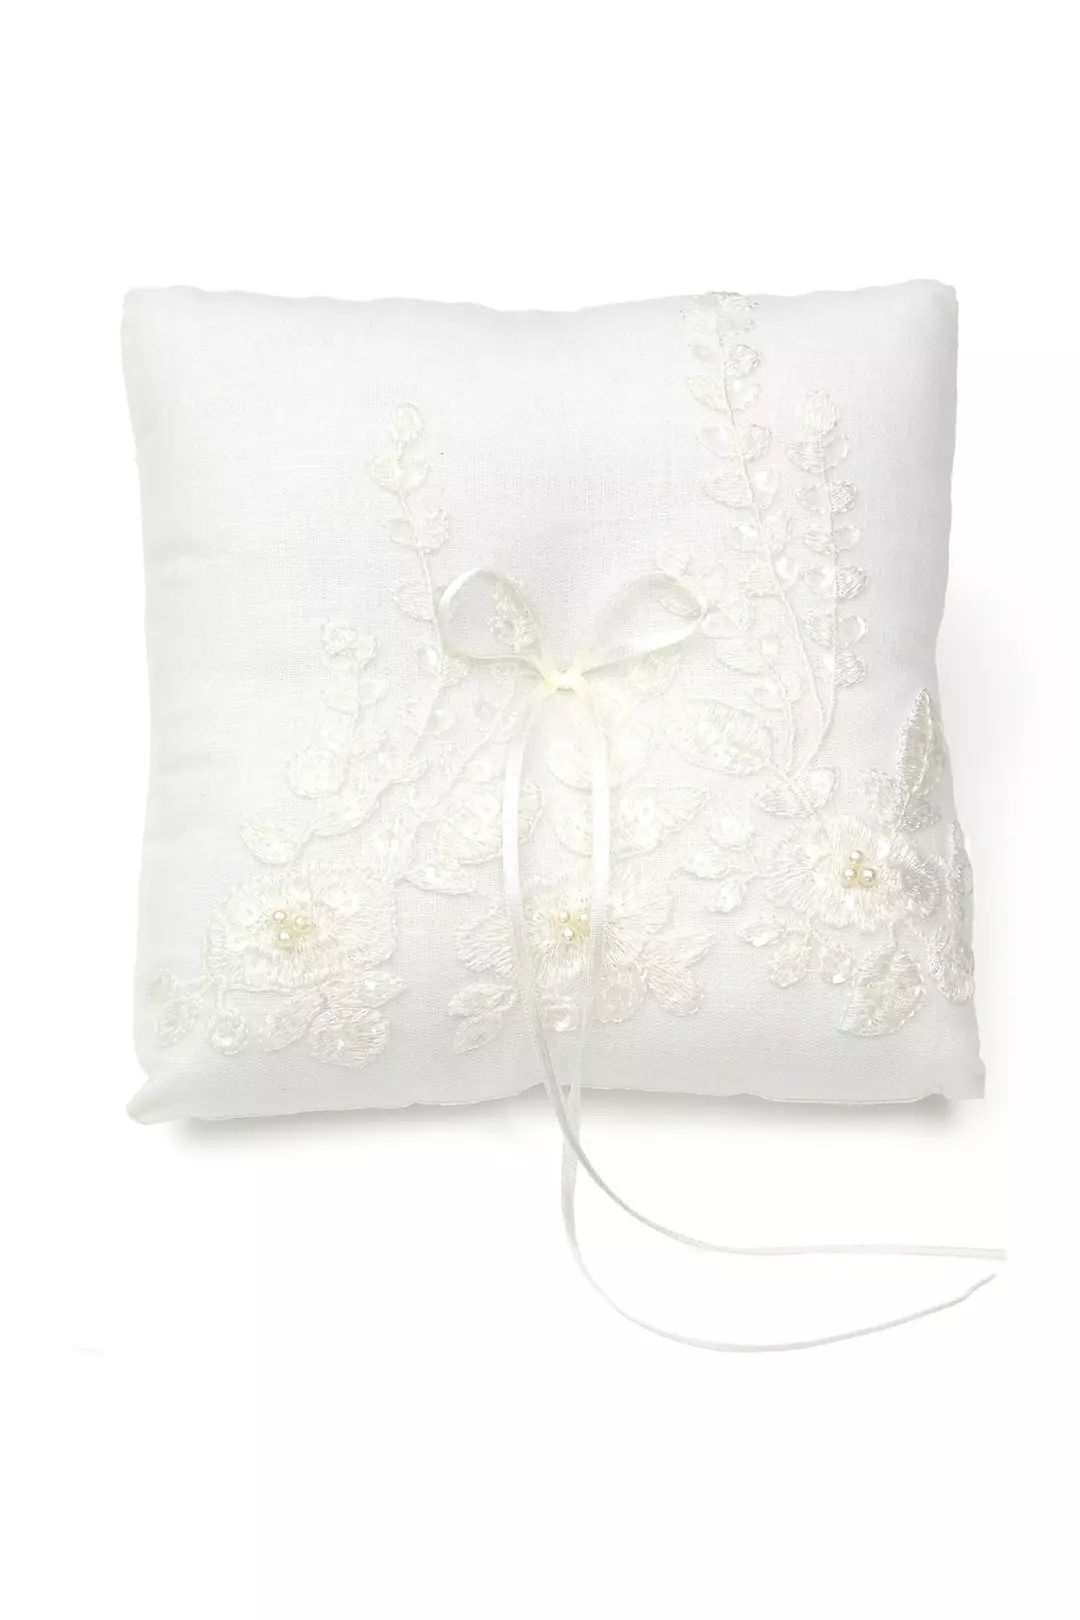 Embroidered Ring Pillow with Faux Pearls Image